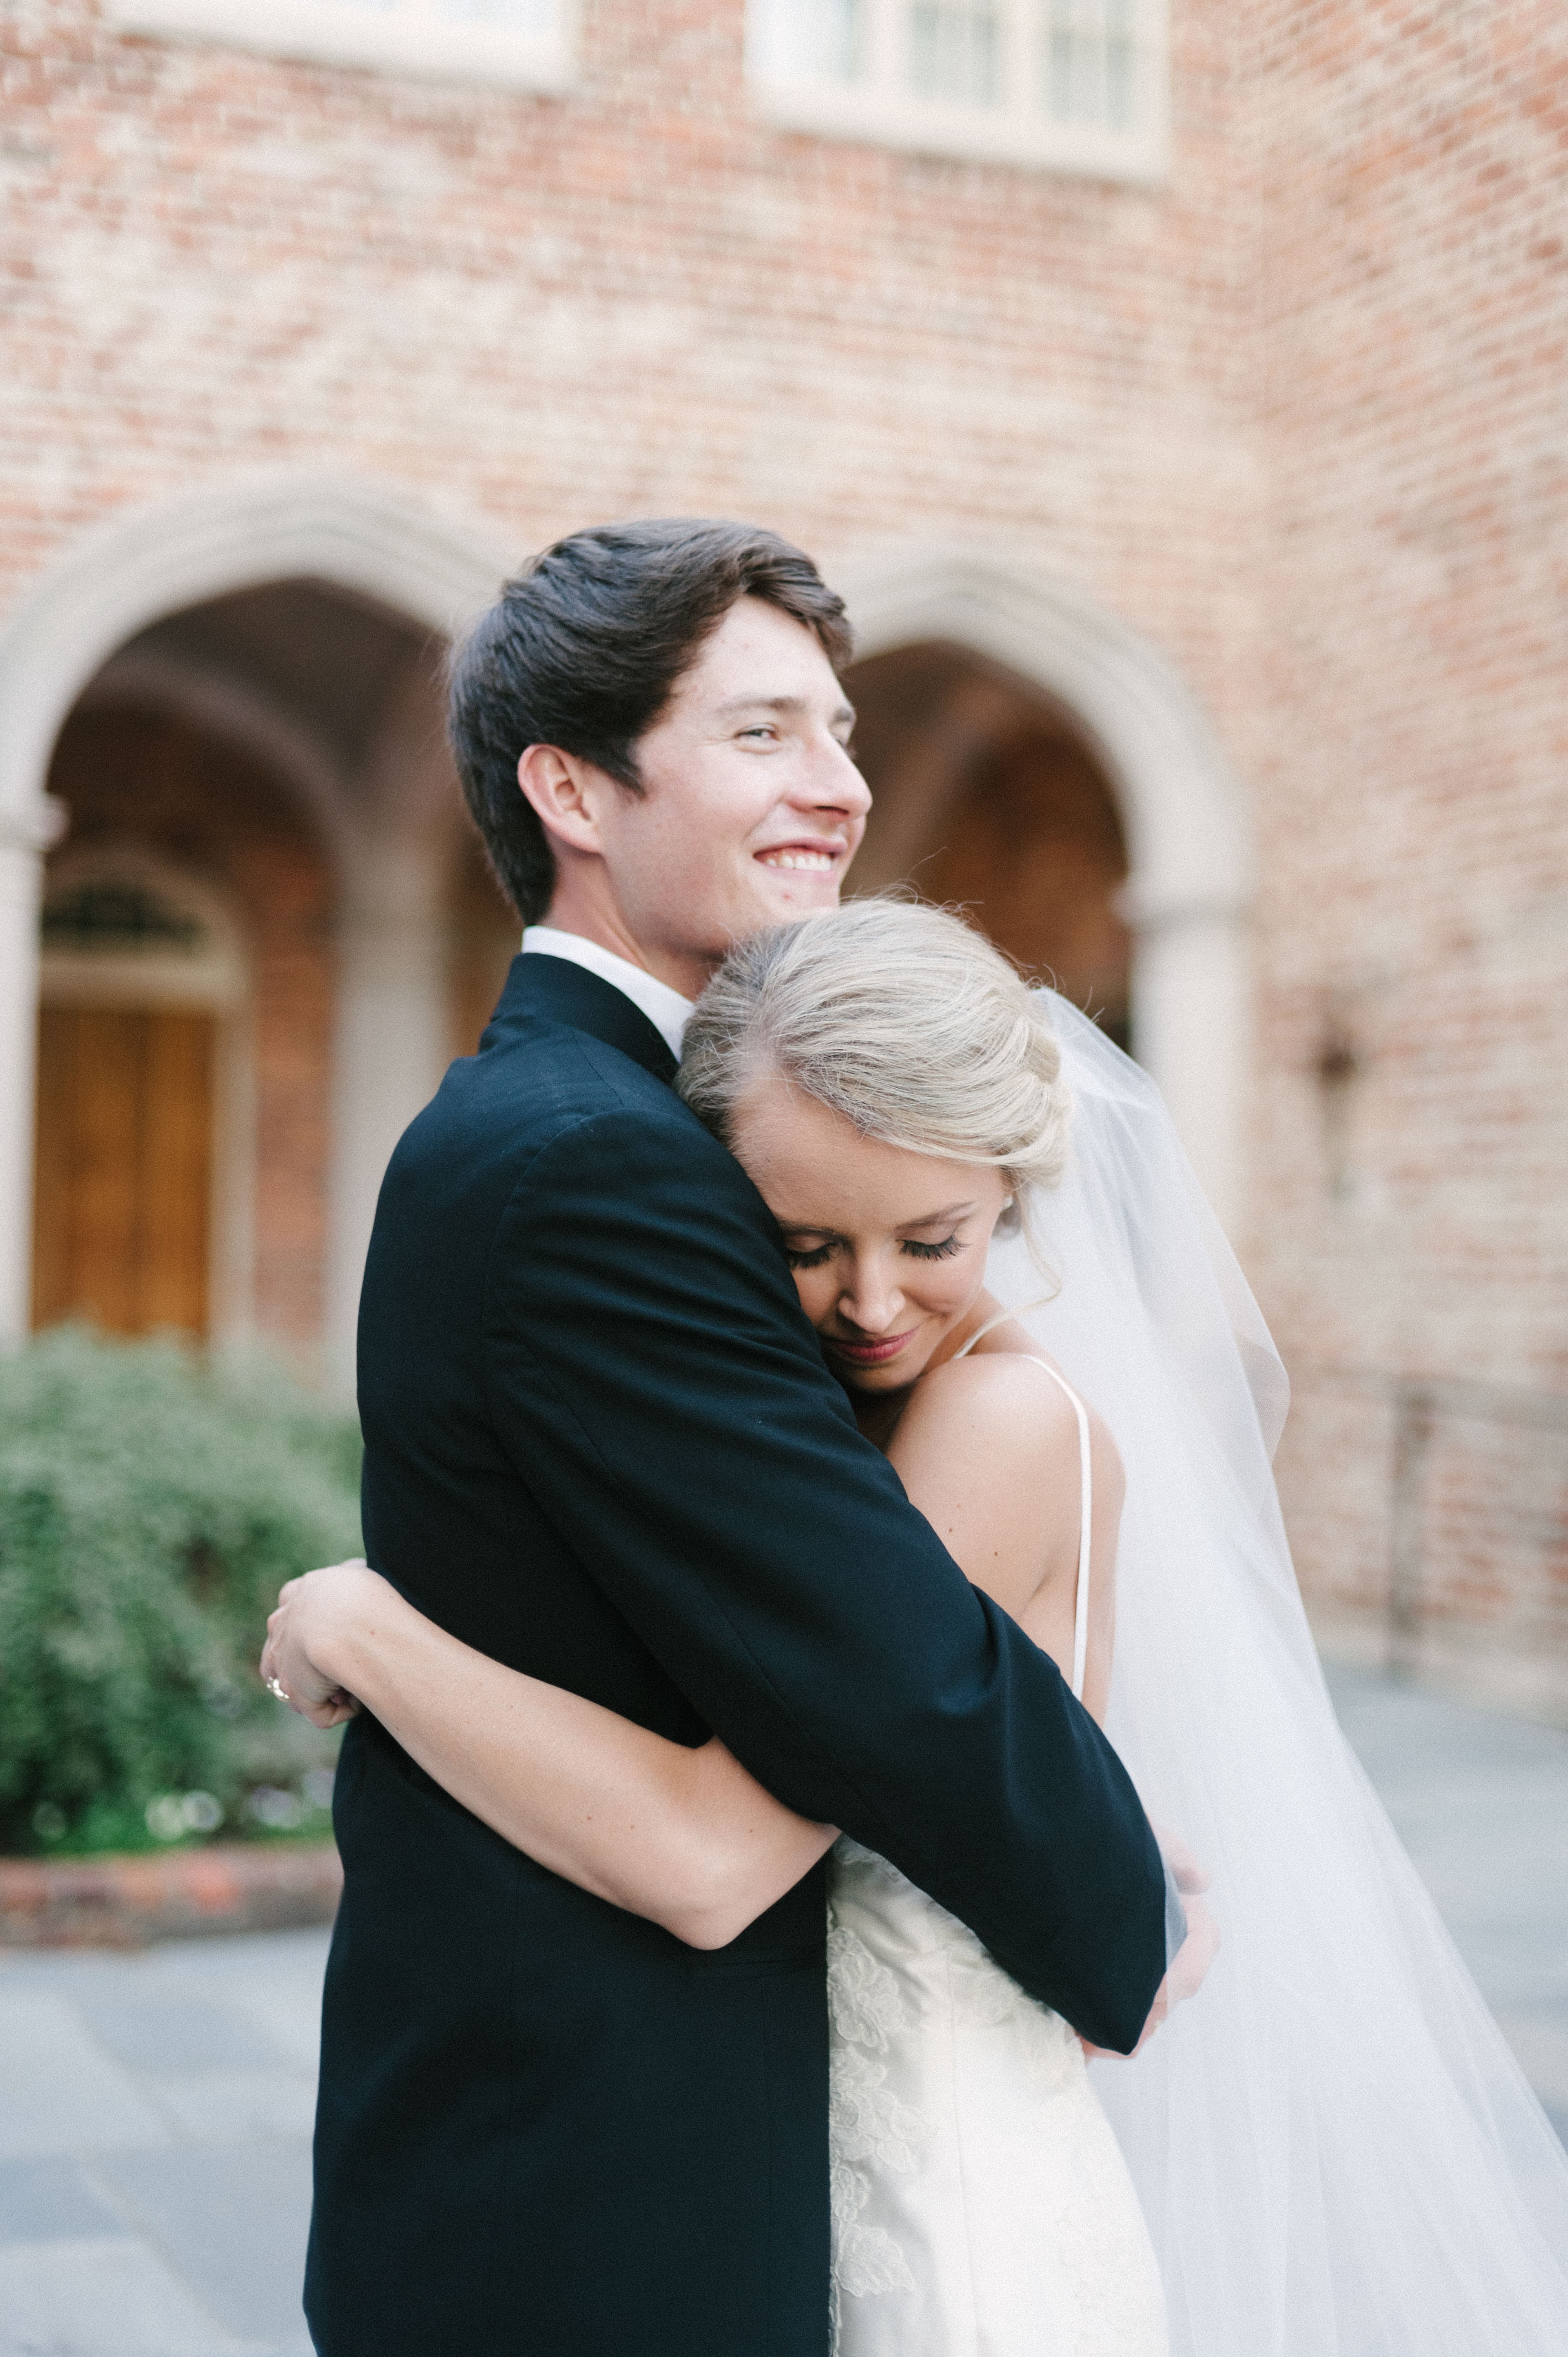 Southern wedding couples' portraits in Selma Alabama at First Baptist Church